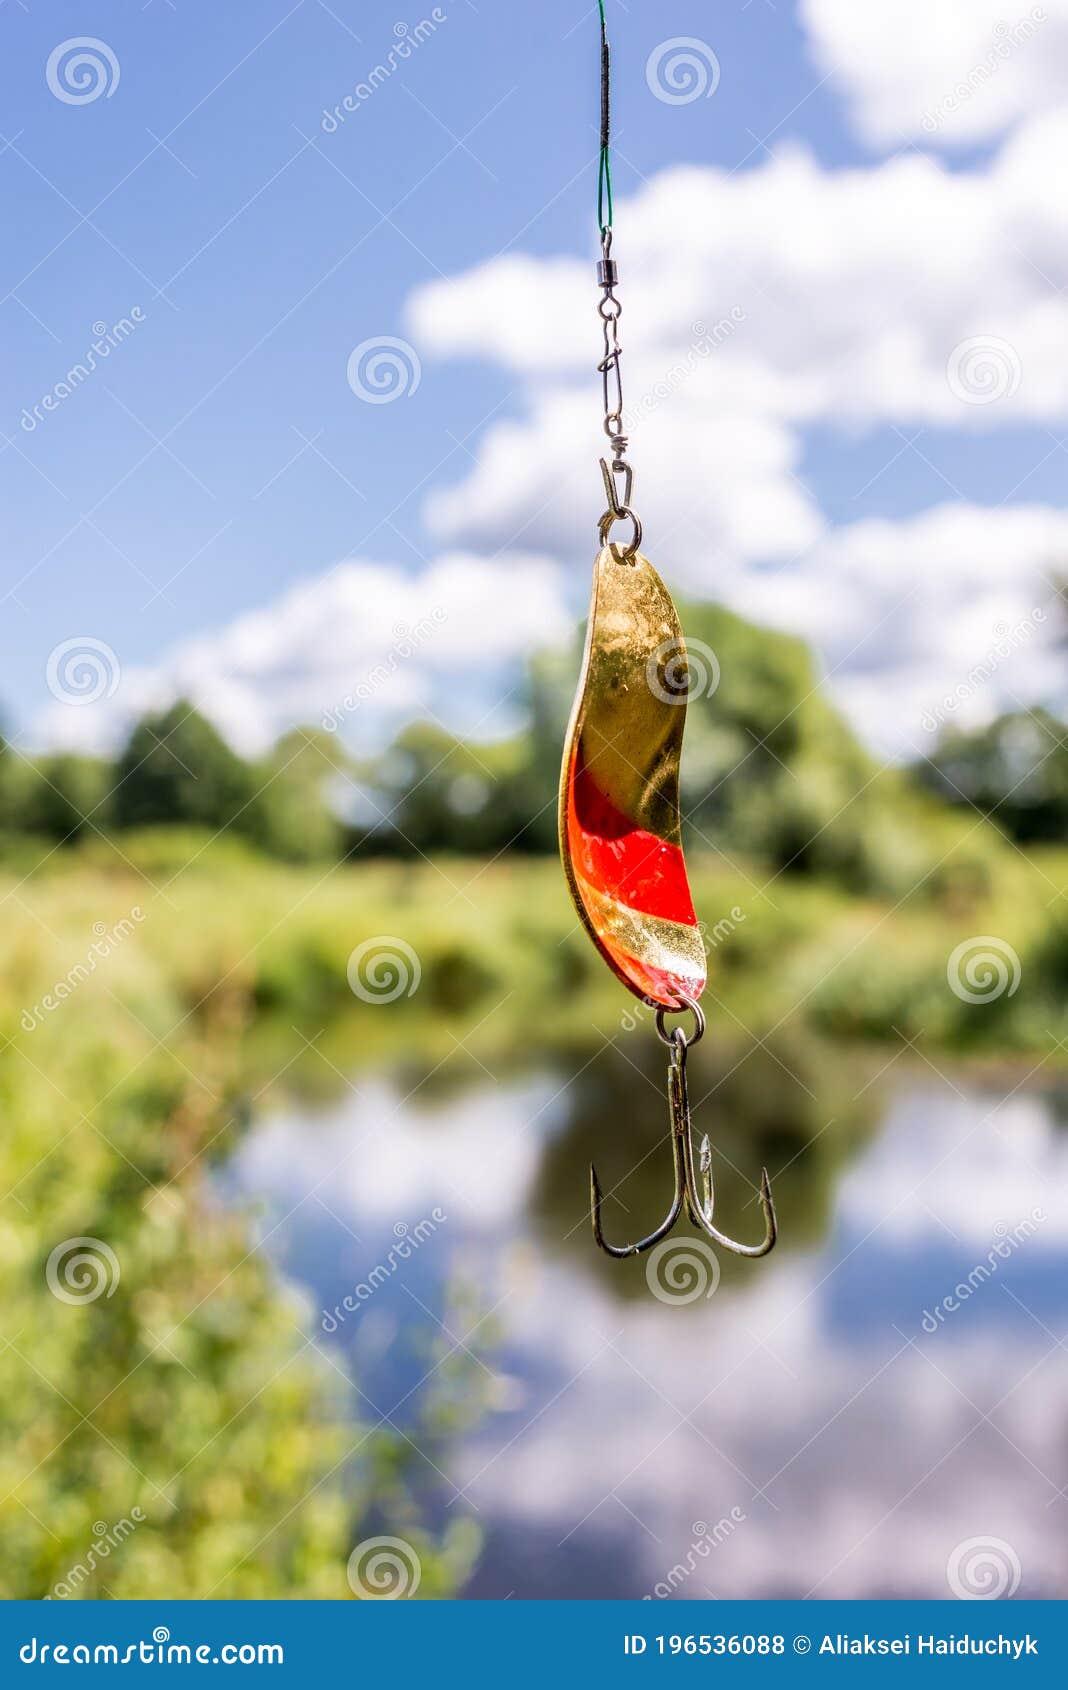 Metal Bait for Fishing/shine for Fishing Hangs on a Fishing Line Against  the Background of the River Stock Photo - Image of metallic, gear: 196536088